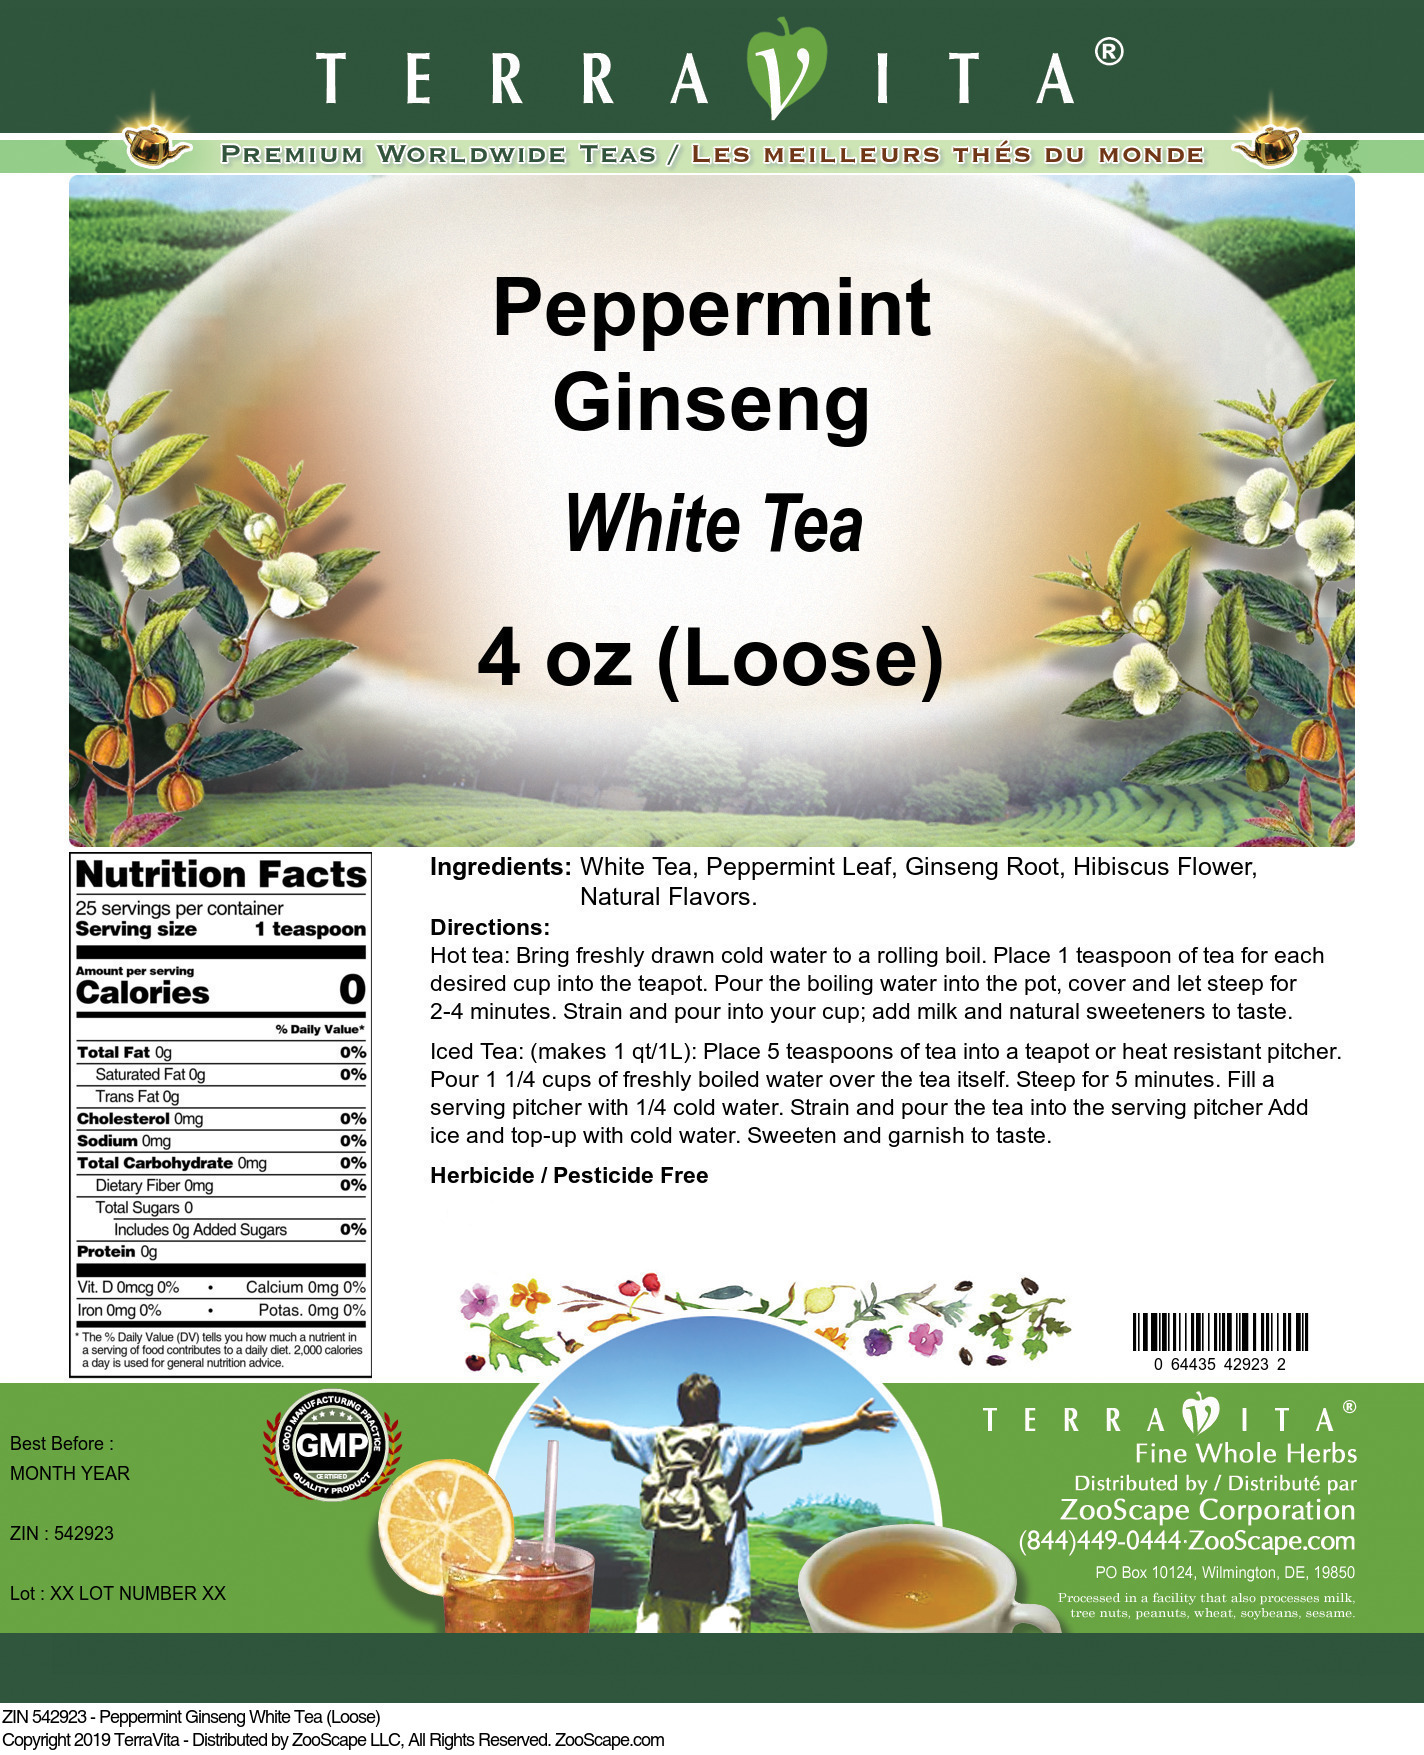 Peppermint Ginseng White Tea (Loose) - Label